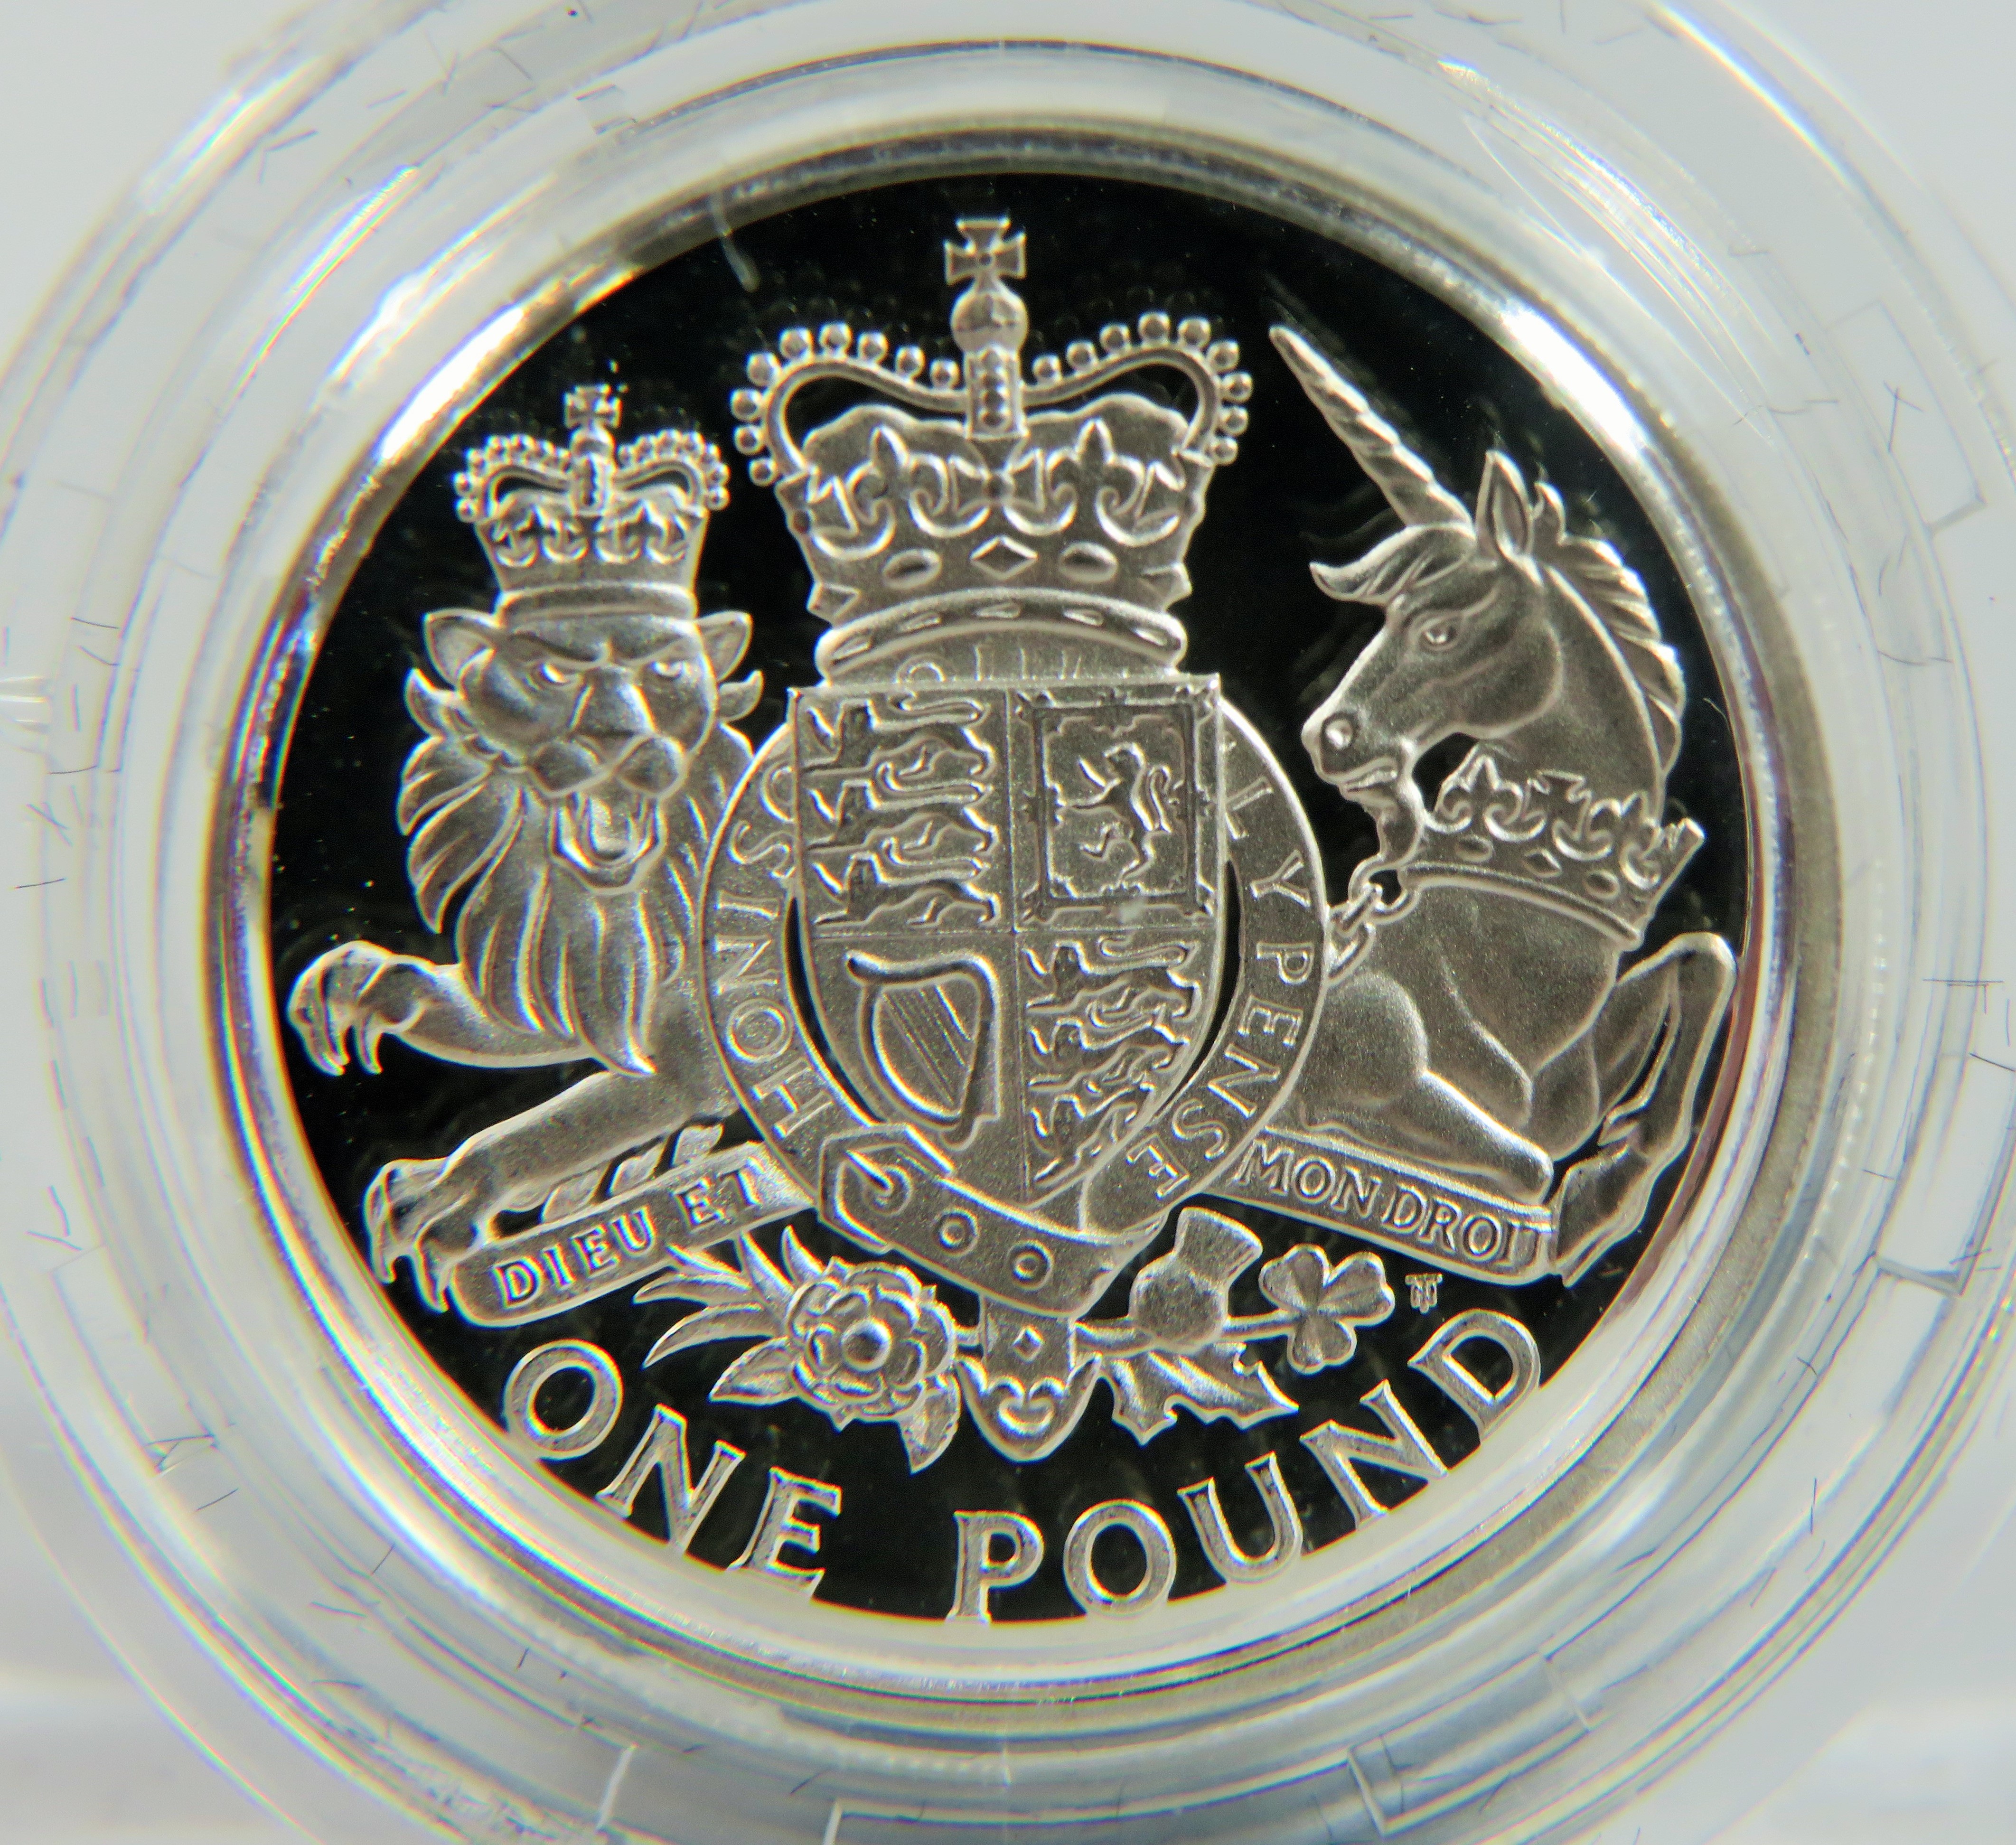 Royal Mint 2015 UK .925 Silver Piedfort Proof One Pound Coin 'The Royal Arms' Ltd Edition 406 of